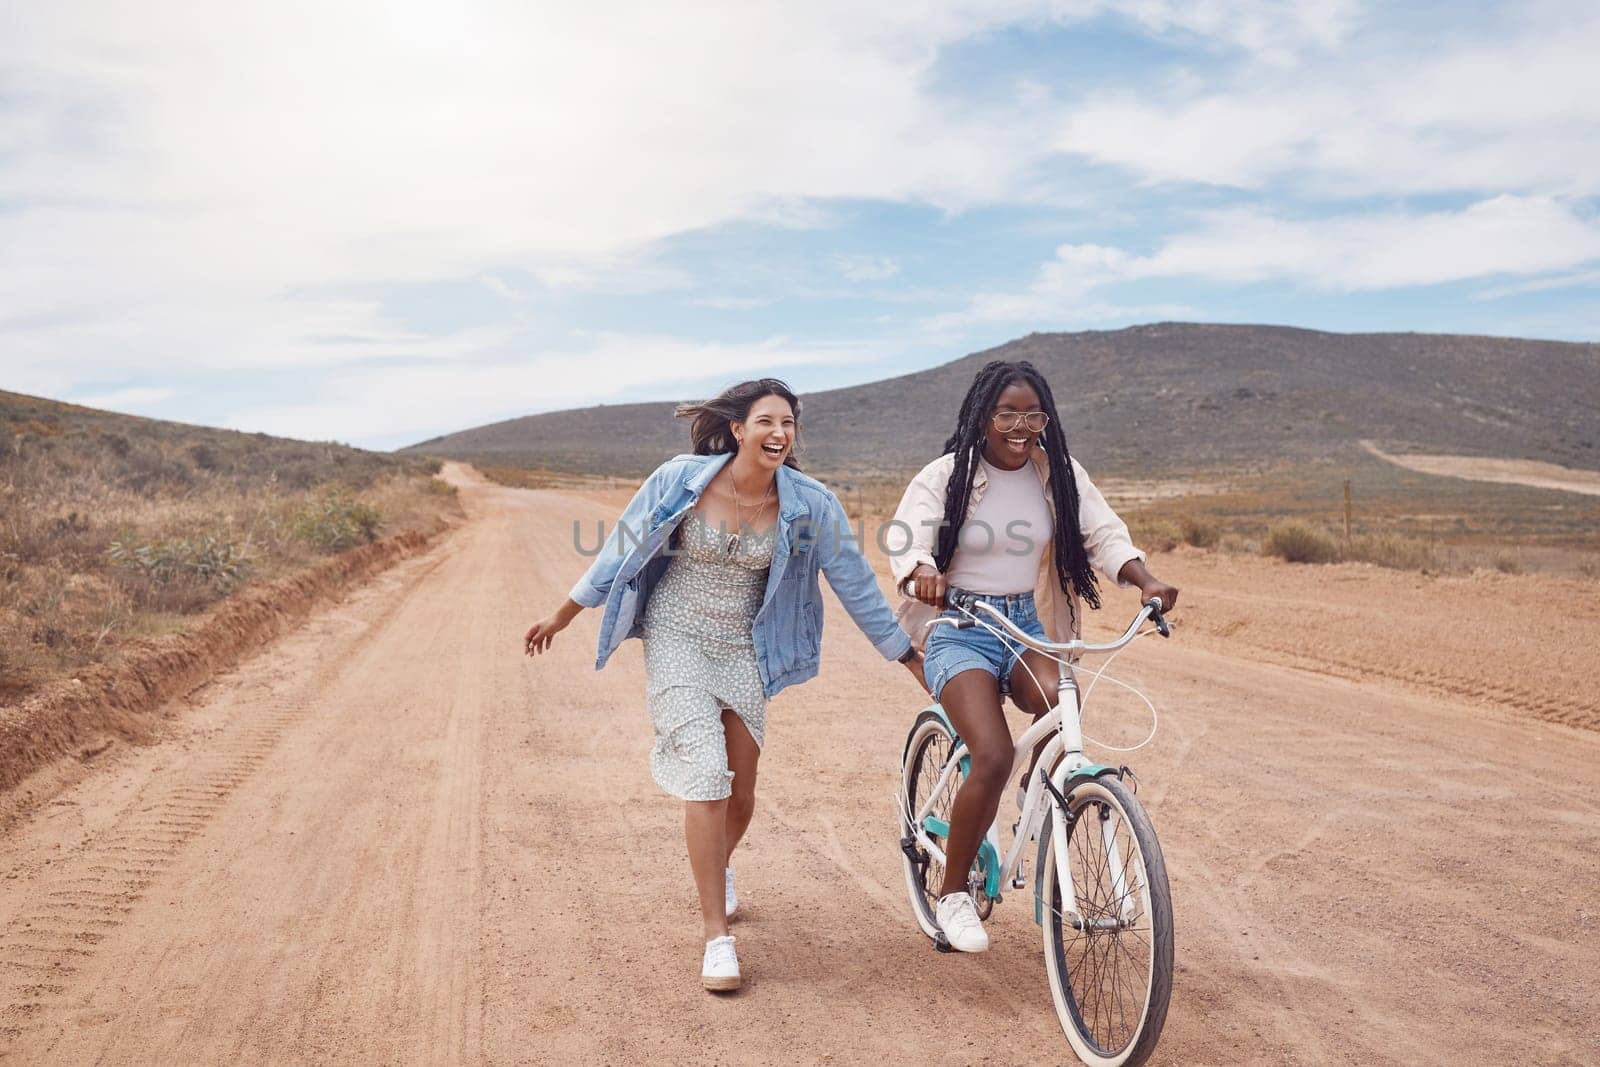 Bike ride, girl friends and road trip fun of women outdoor on a desert path on summer vacation. Cycling, running and freedom of young people together with bicycle transportation feeling free by YuriArcurs